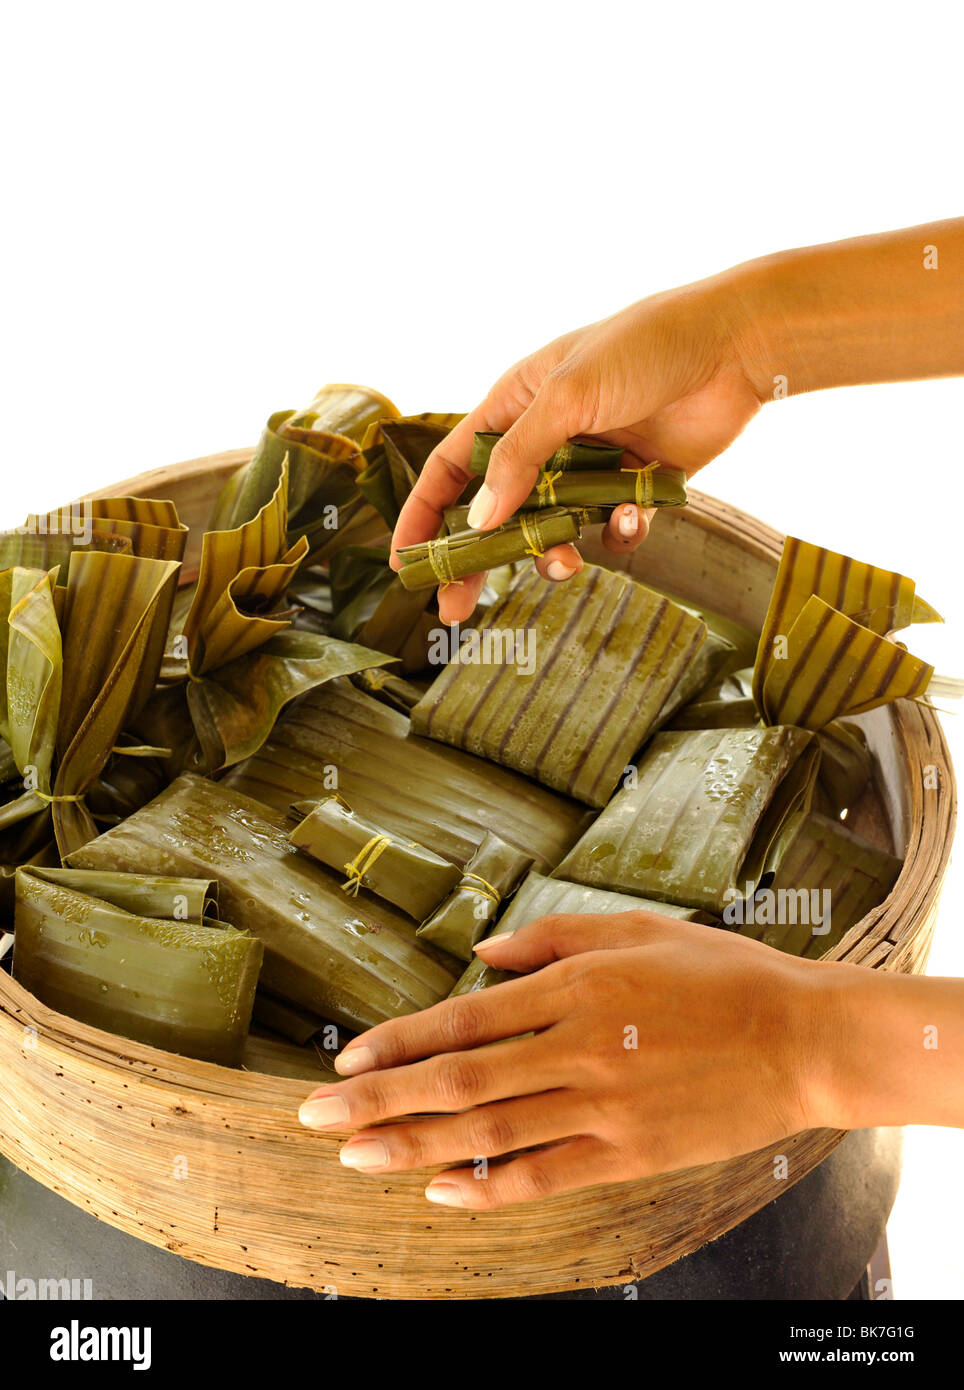 Steamed herbal banana pouches, Nurture Spa, Tagaytay, Philippines, Southeast Asia, Asia Stock Photo